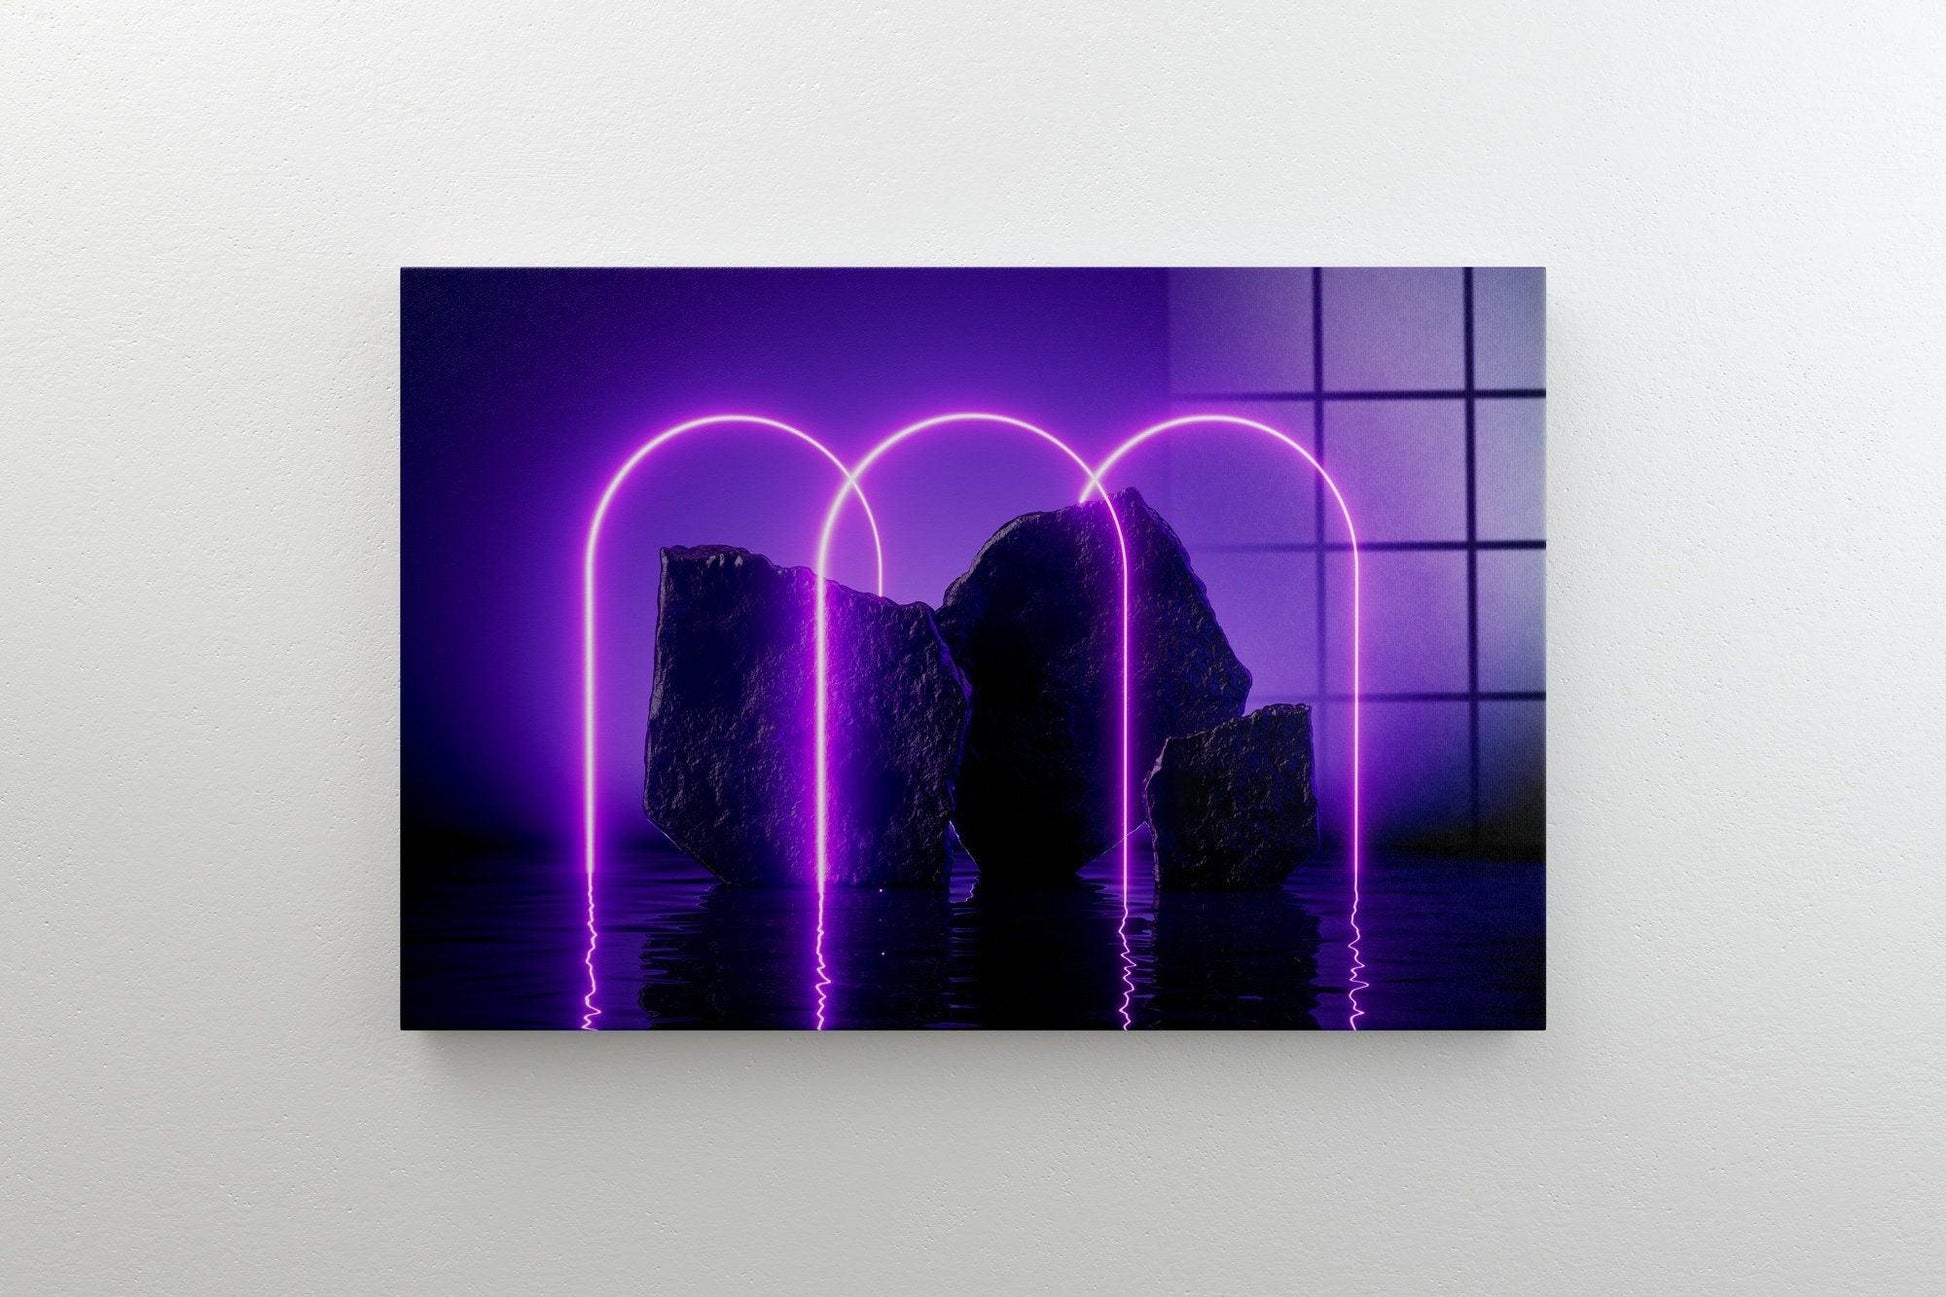 3d render glass wall art| abstract futuristic glass wall art, neon wall art, purple neon canvas wall decor, birthday gift, neon photography